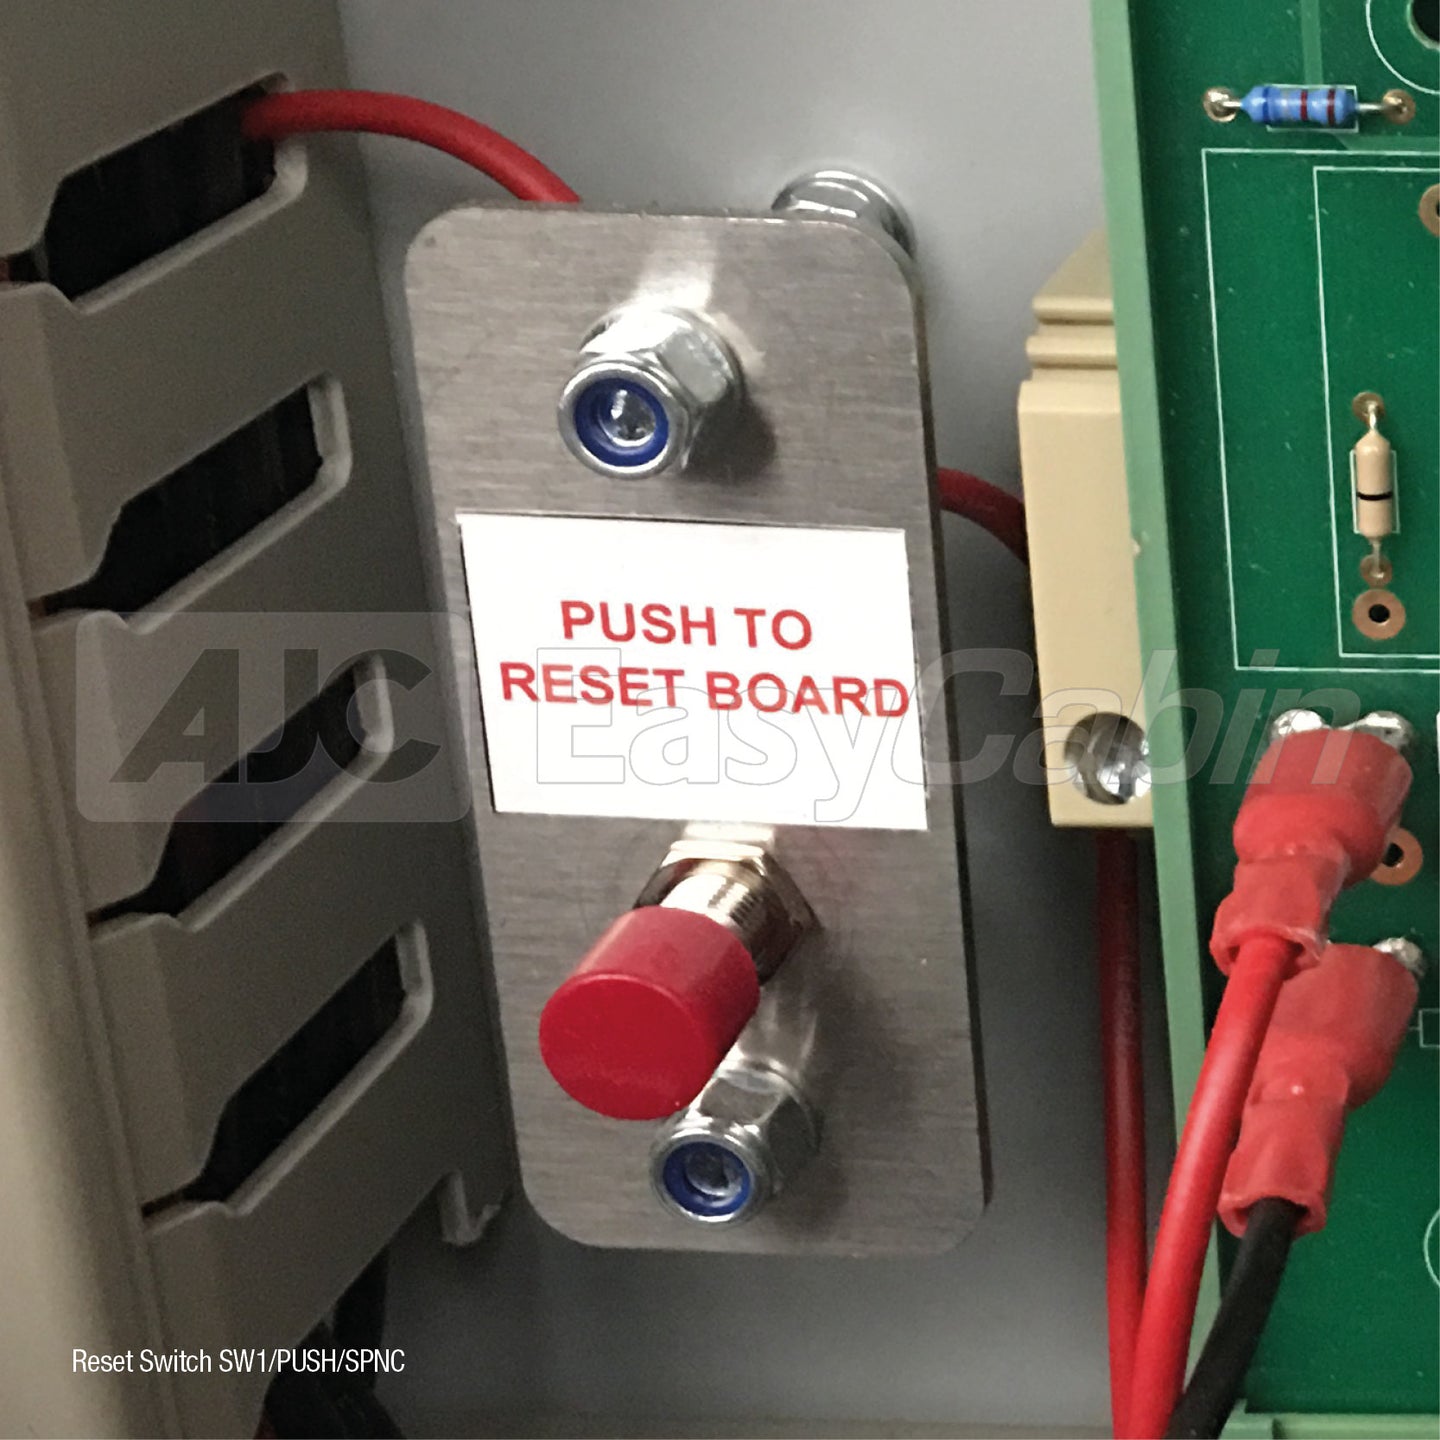 Reset Switch - SW1/PUSH/SPNC (for battery monitoring board)